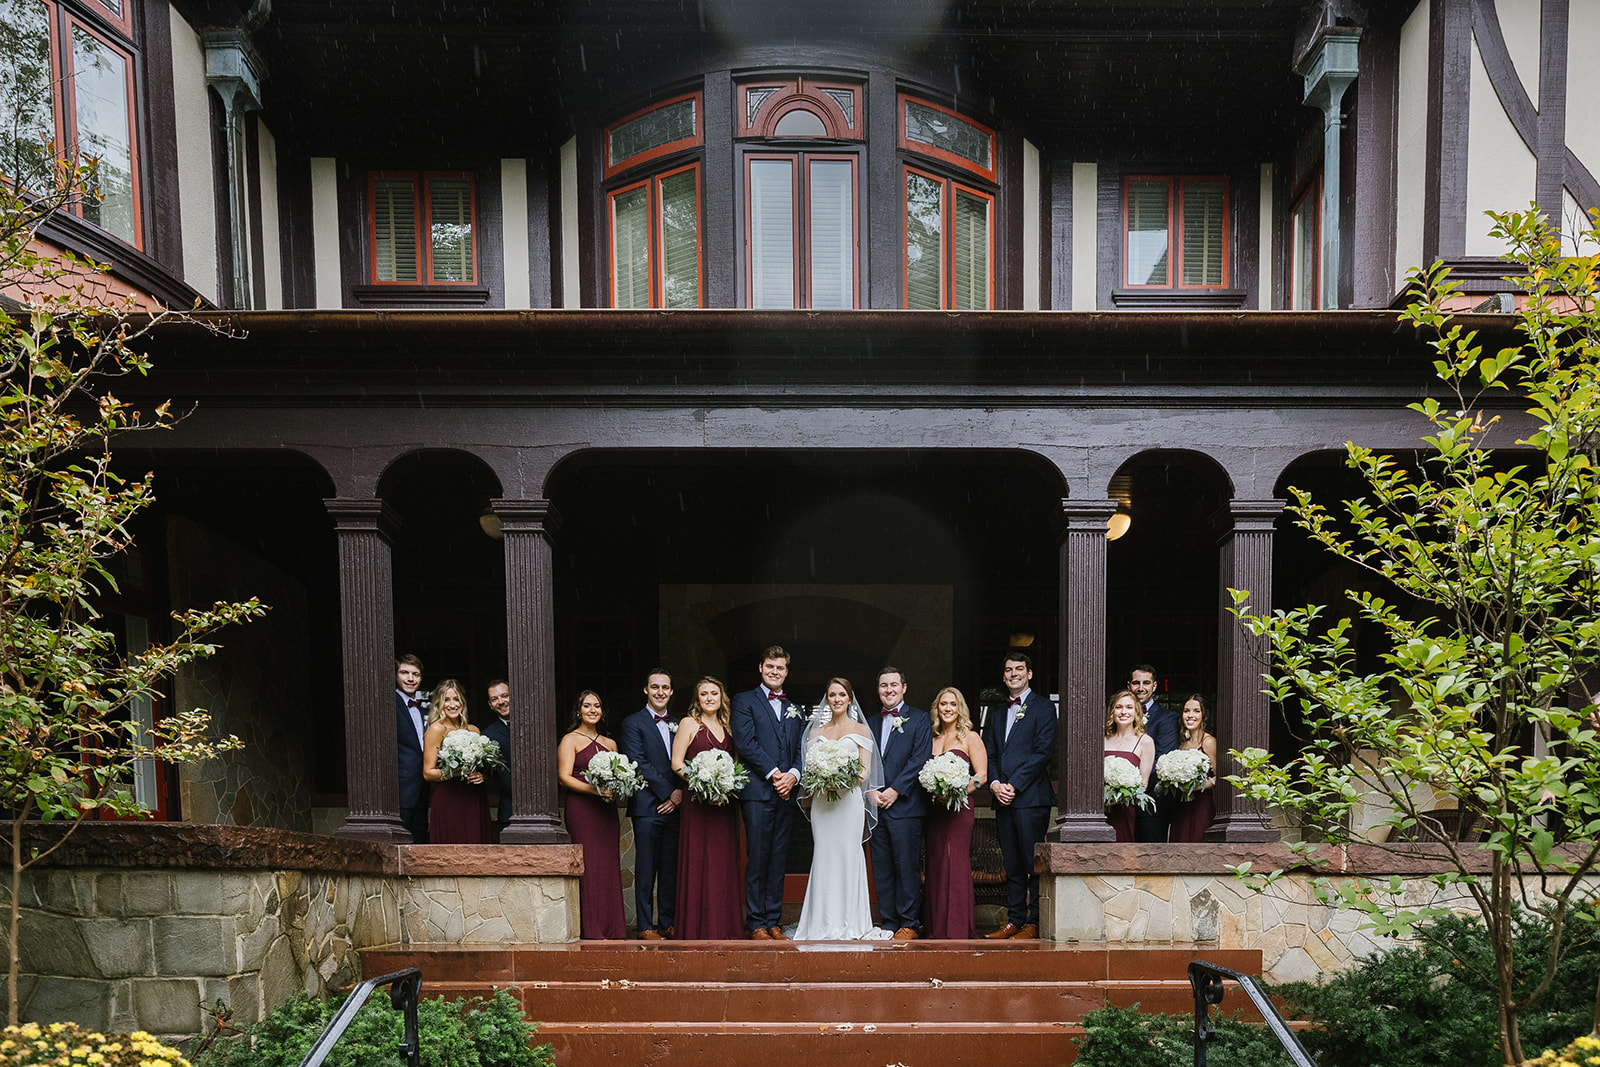 Bridal party poses on the porch of the Hug Lounge and Refectory. Urban Row Wedding 373. Photo credit ©️Urban Row Photography www.urbanrowphoto.com 